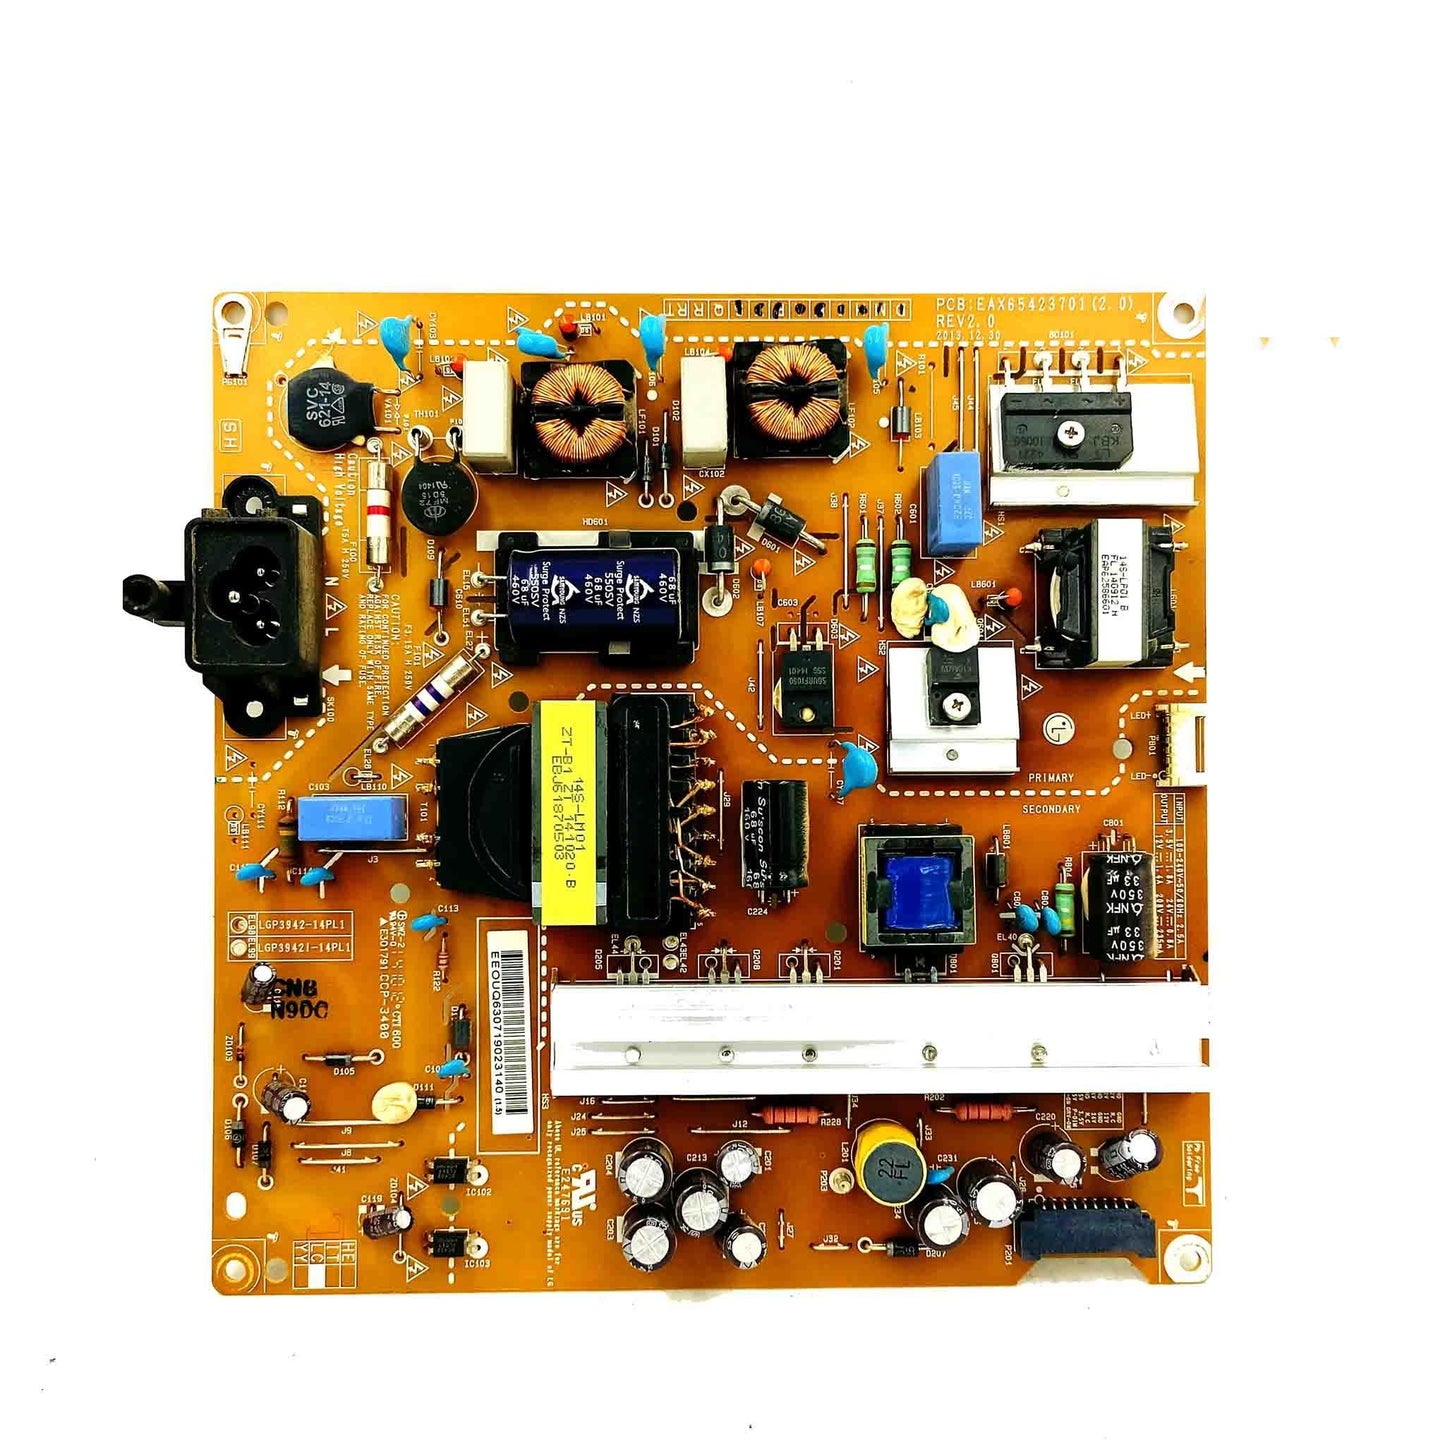 Power Supply Suitable for LG LED TV Model 42LY340C-TA